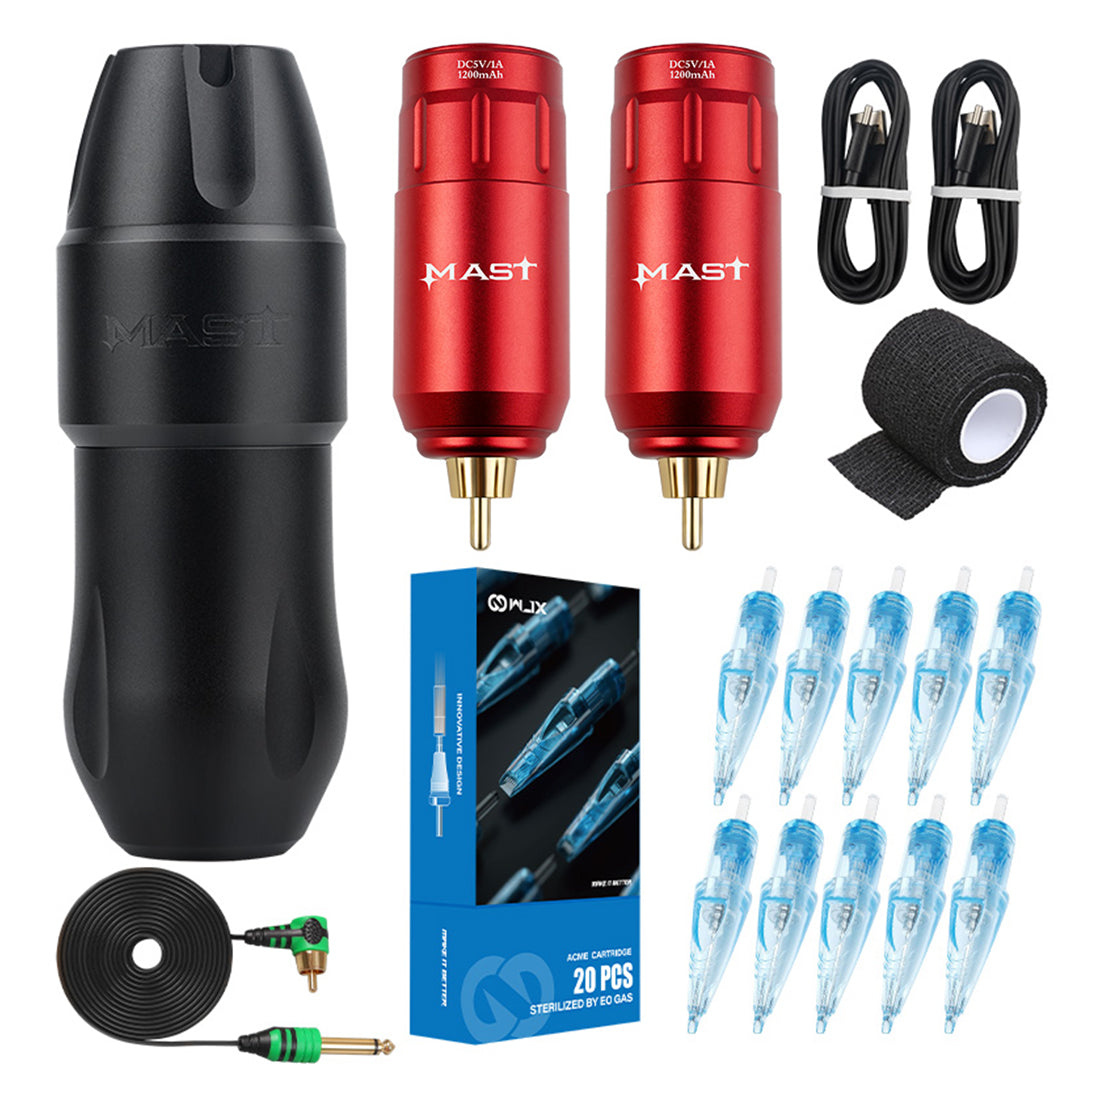 Dragonhawk Mast Tour Pro Wireless Kit with Replacement Battery